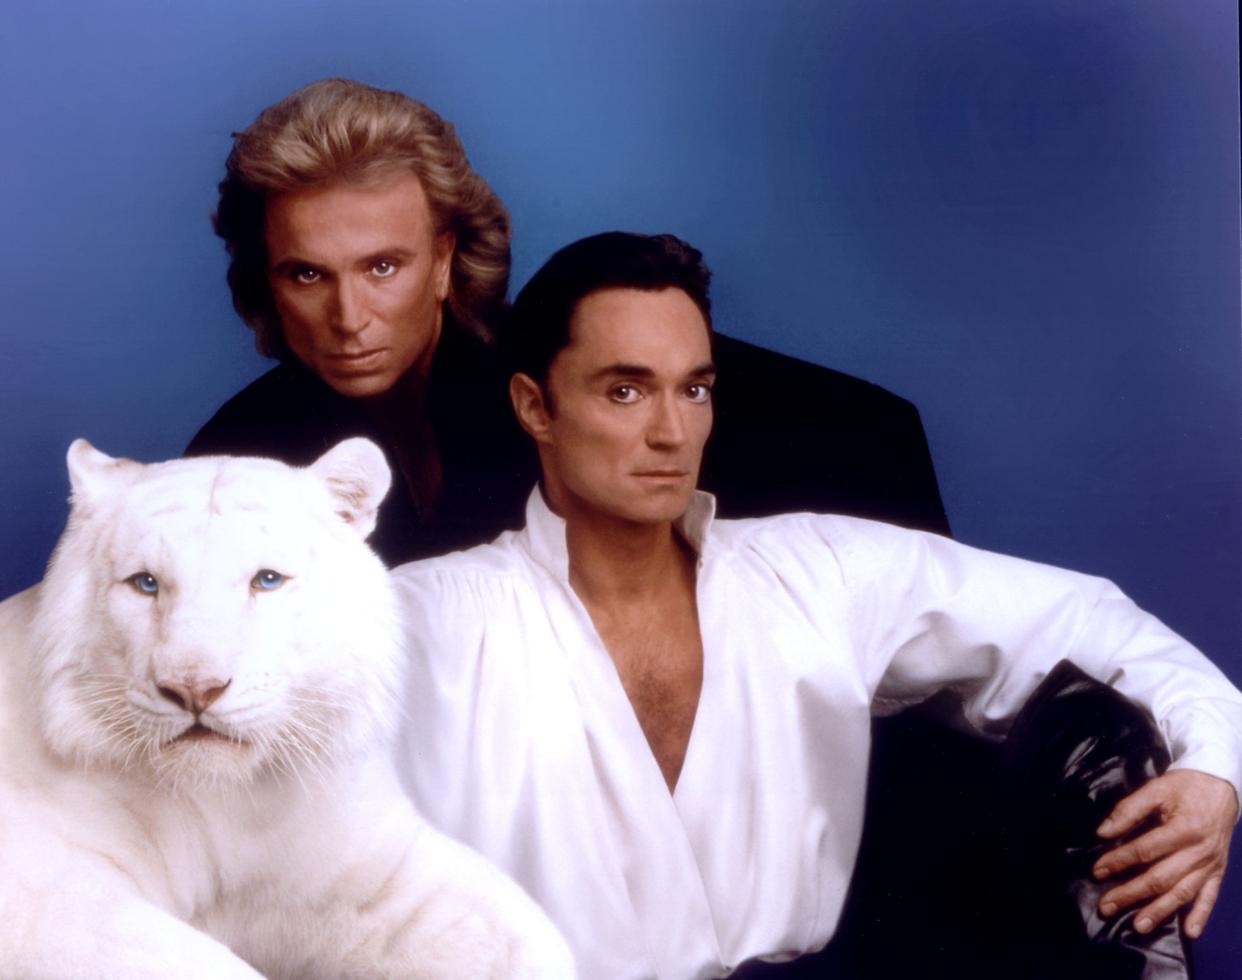 The pair pose with a white tiger in 2000, soon after they were honored as Magicians of the Century.